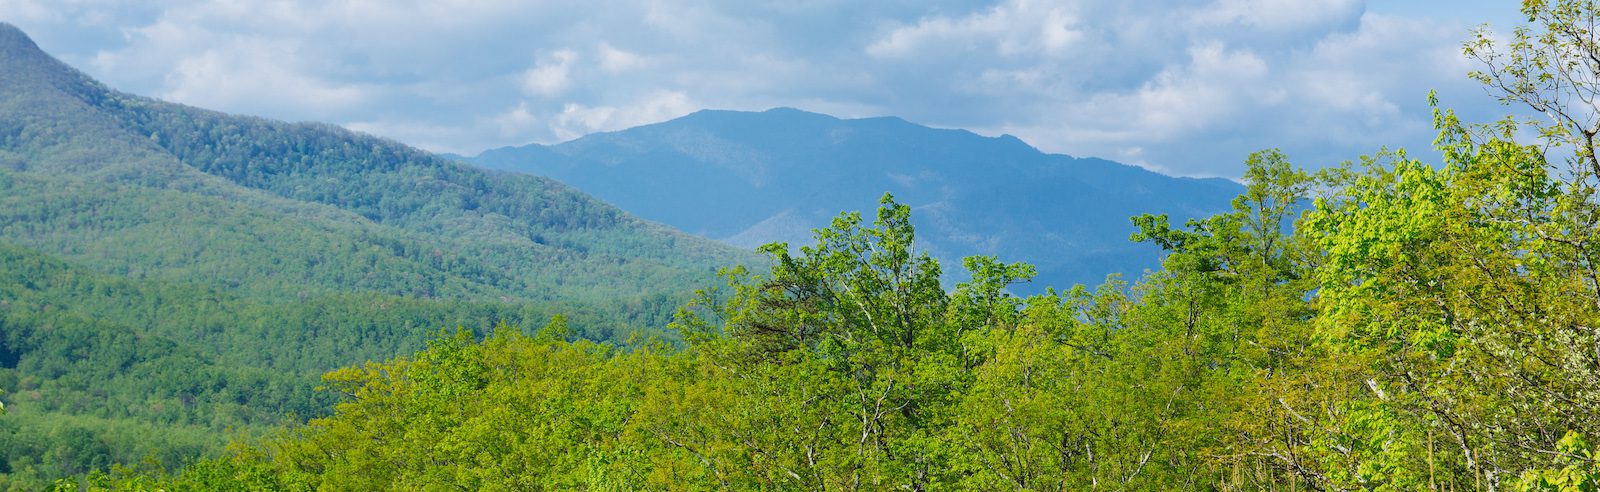 5 of the Best Spring Hikes in the Smoky Mountains